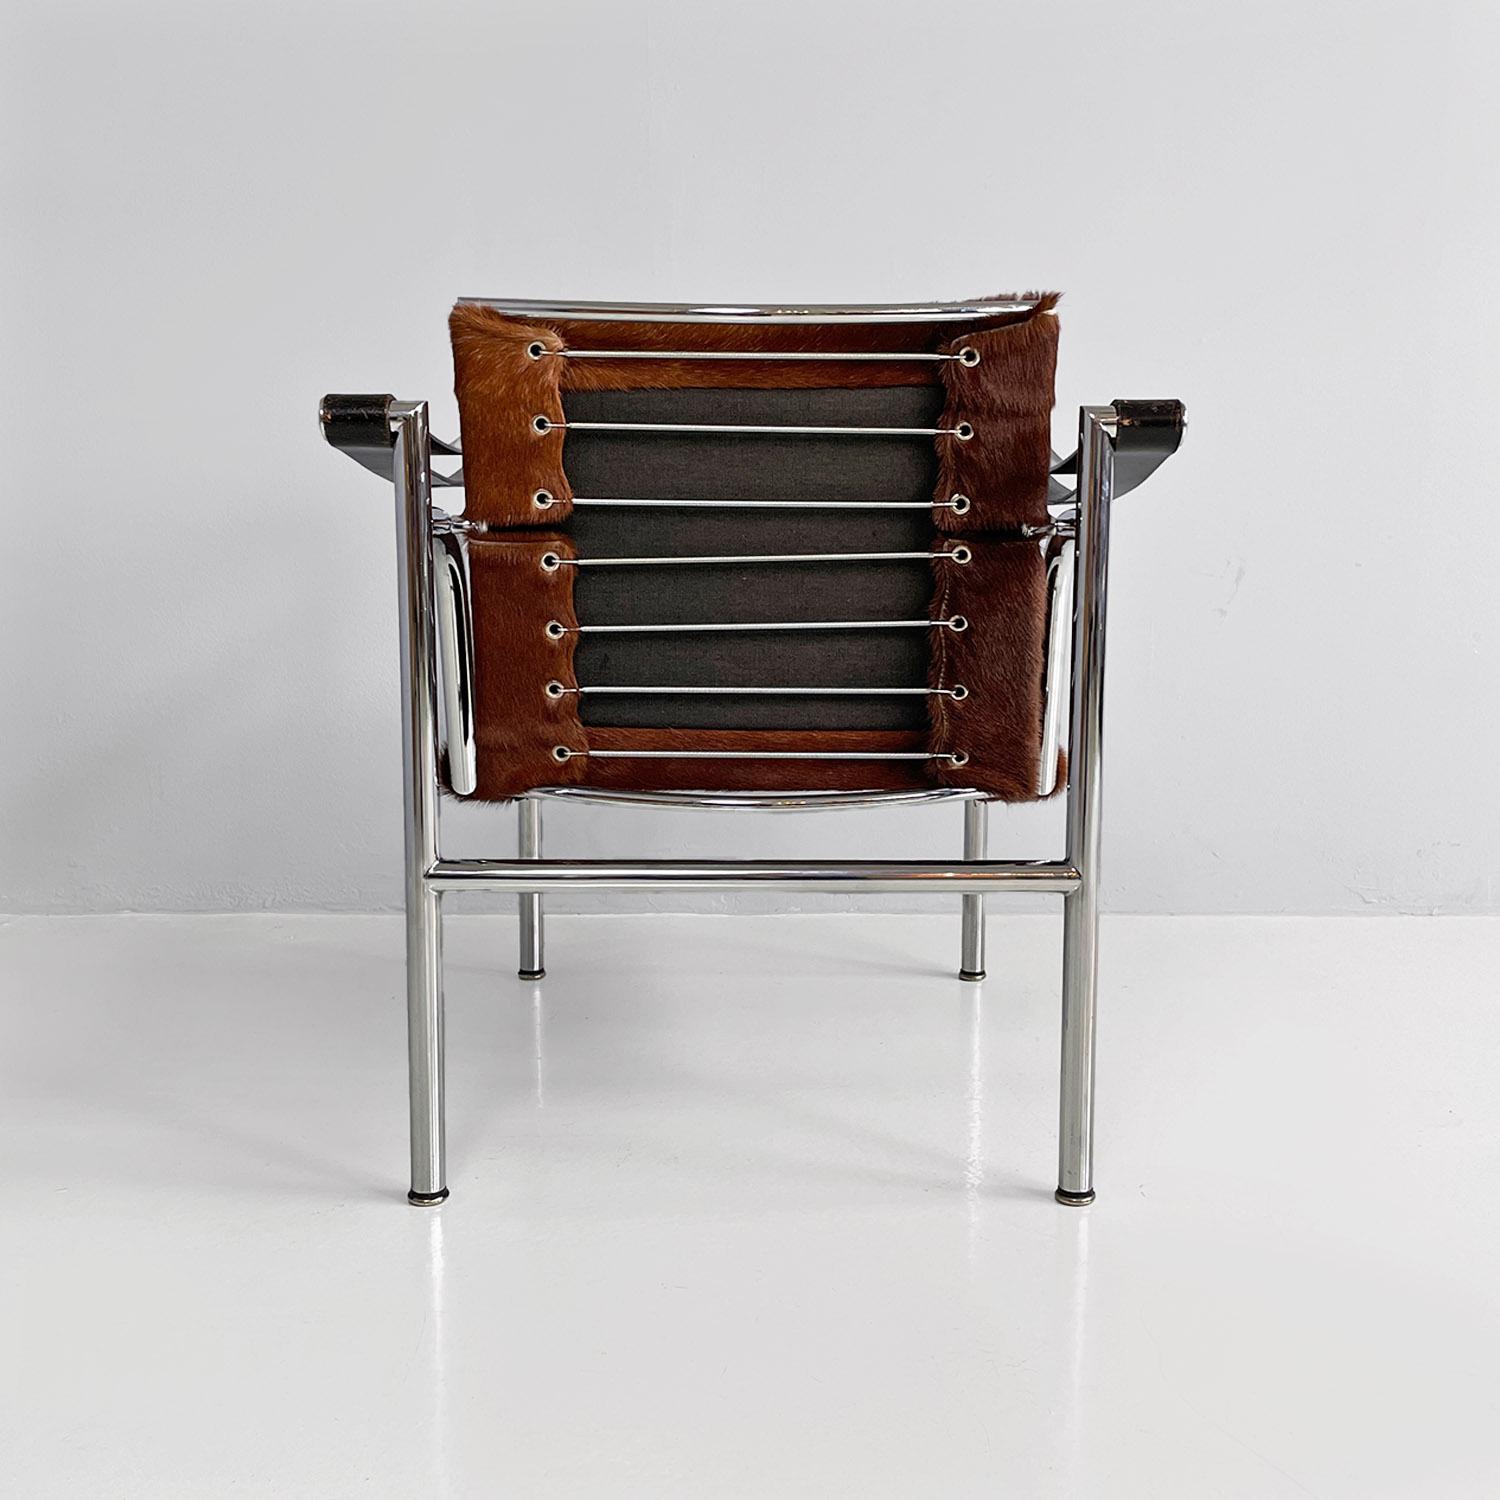 Italian modern LC1 armchair, Le Corbusier, Jeanneret and Perriand, Cassina 1960s For Sale 2